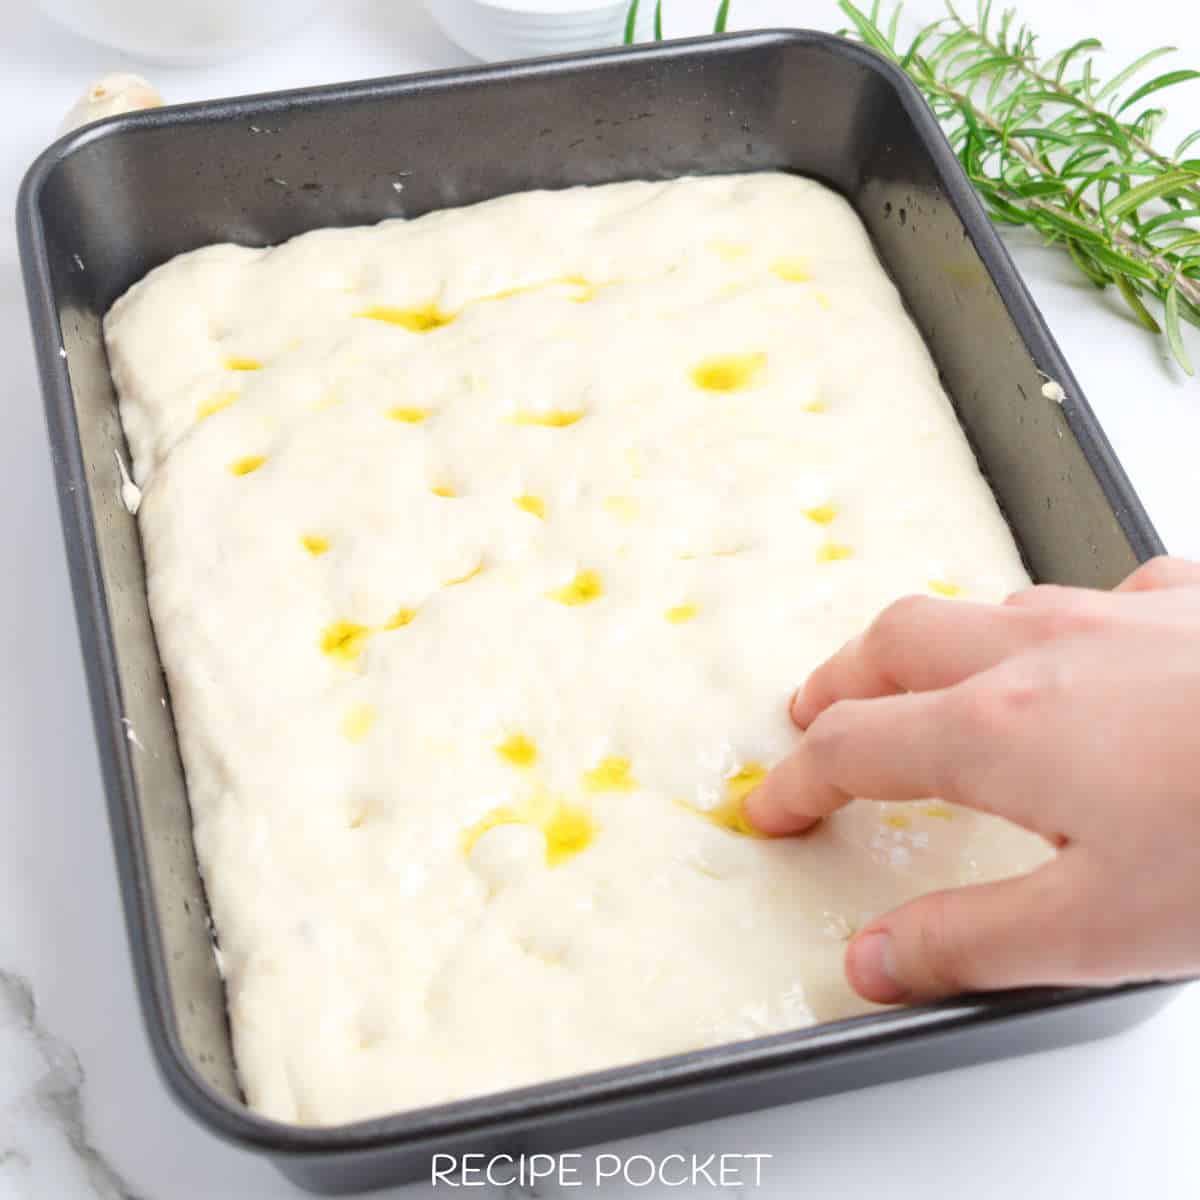 Close up of focicca dough in a black baking tin with a hand in the picture.